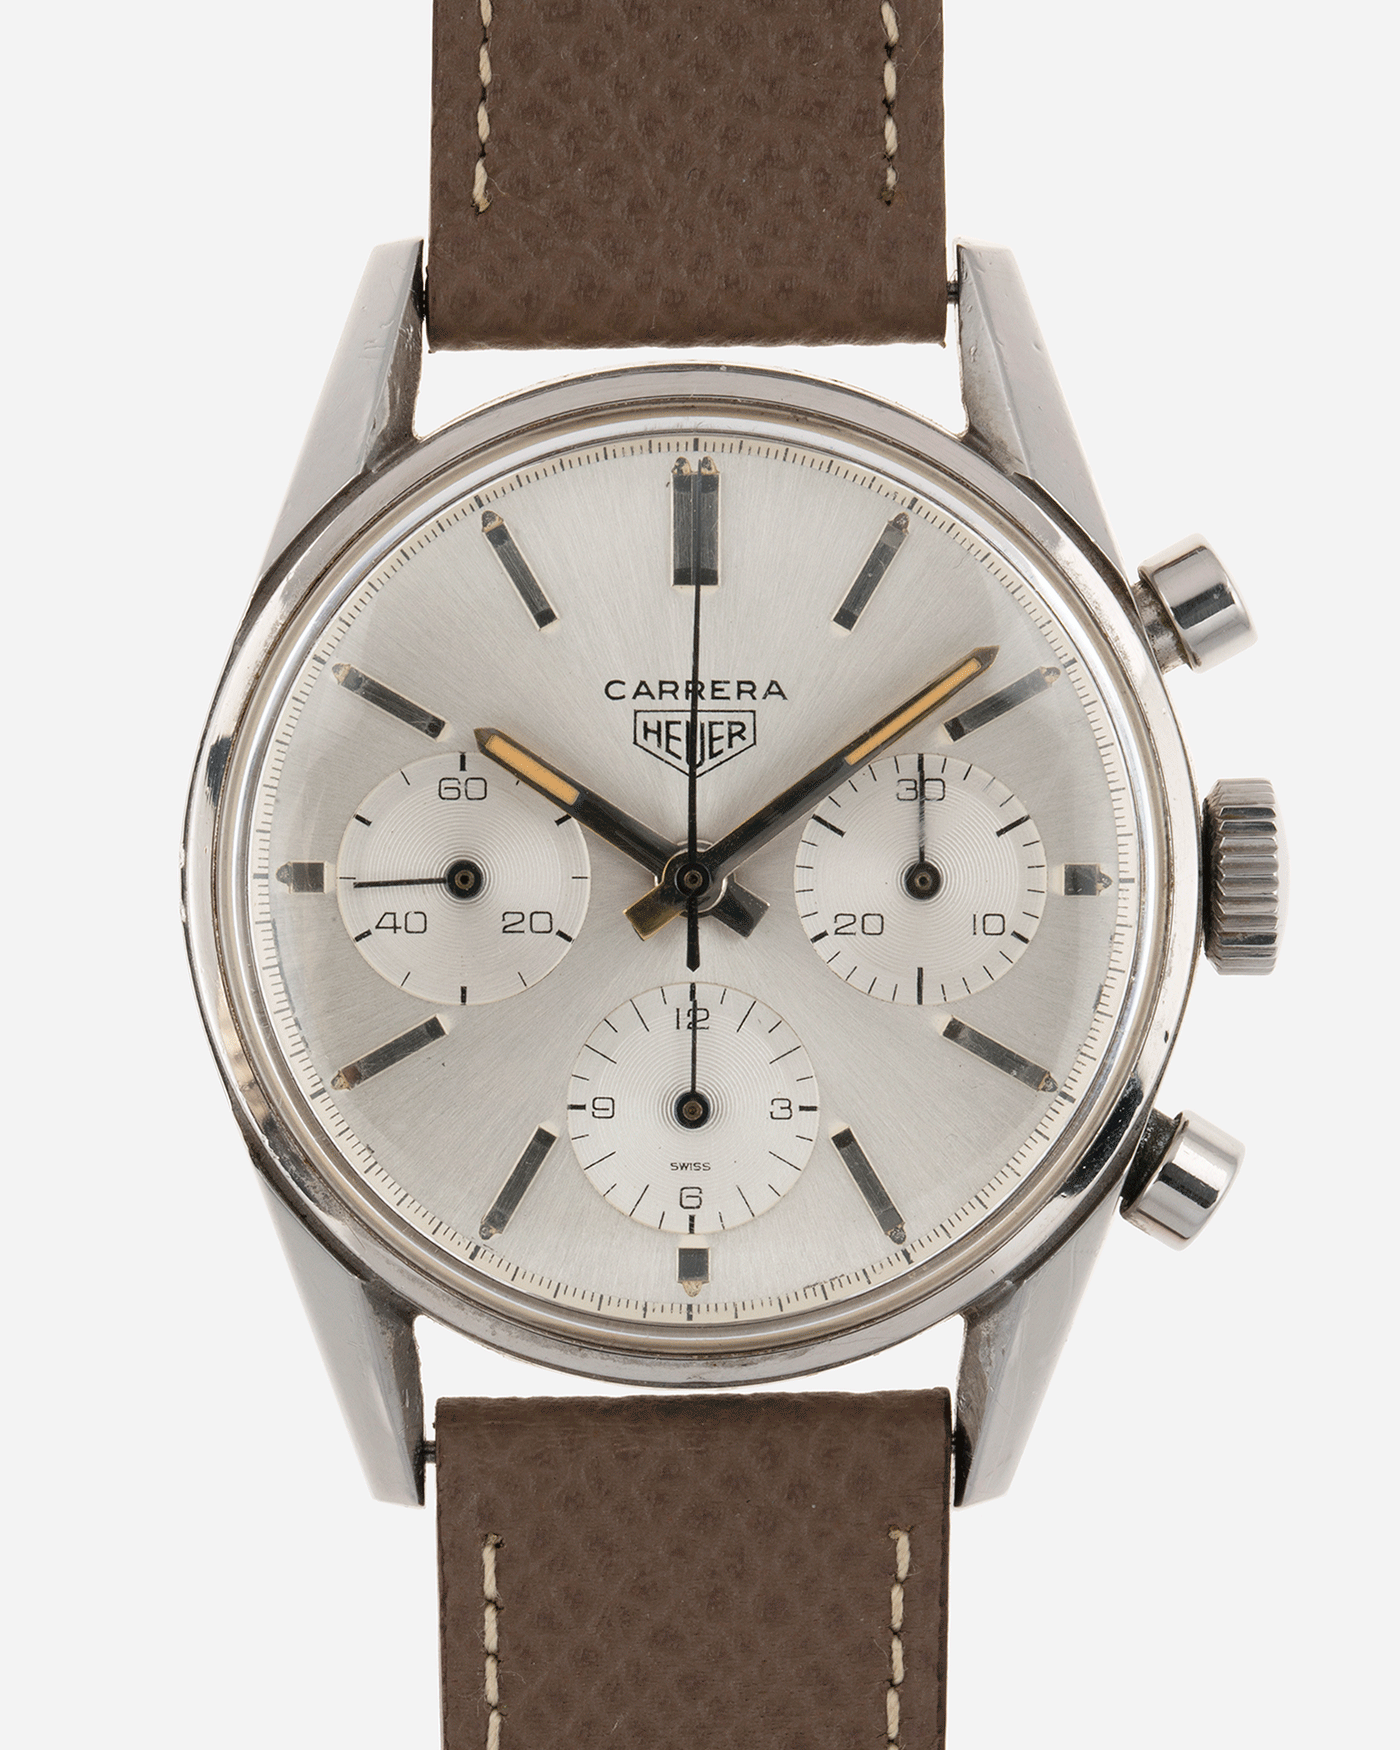 Brand: Heuer Year: 1960’s Model: Carrera Reference Number: 2447S Material: Stainless Steel Movement: Valjoux 72 Case Diameter: 36mm Lug Width: 18mm Bracelet/Strap: Nostime Grained Taupe